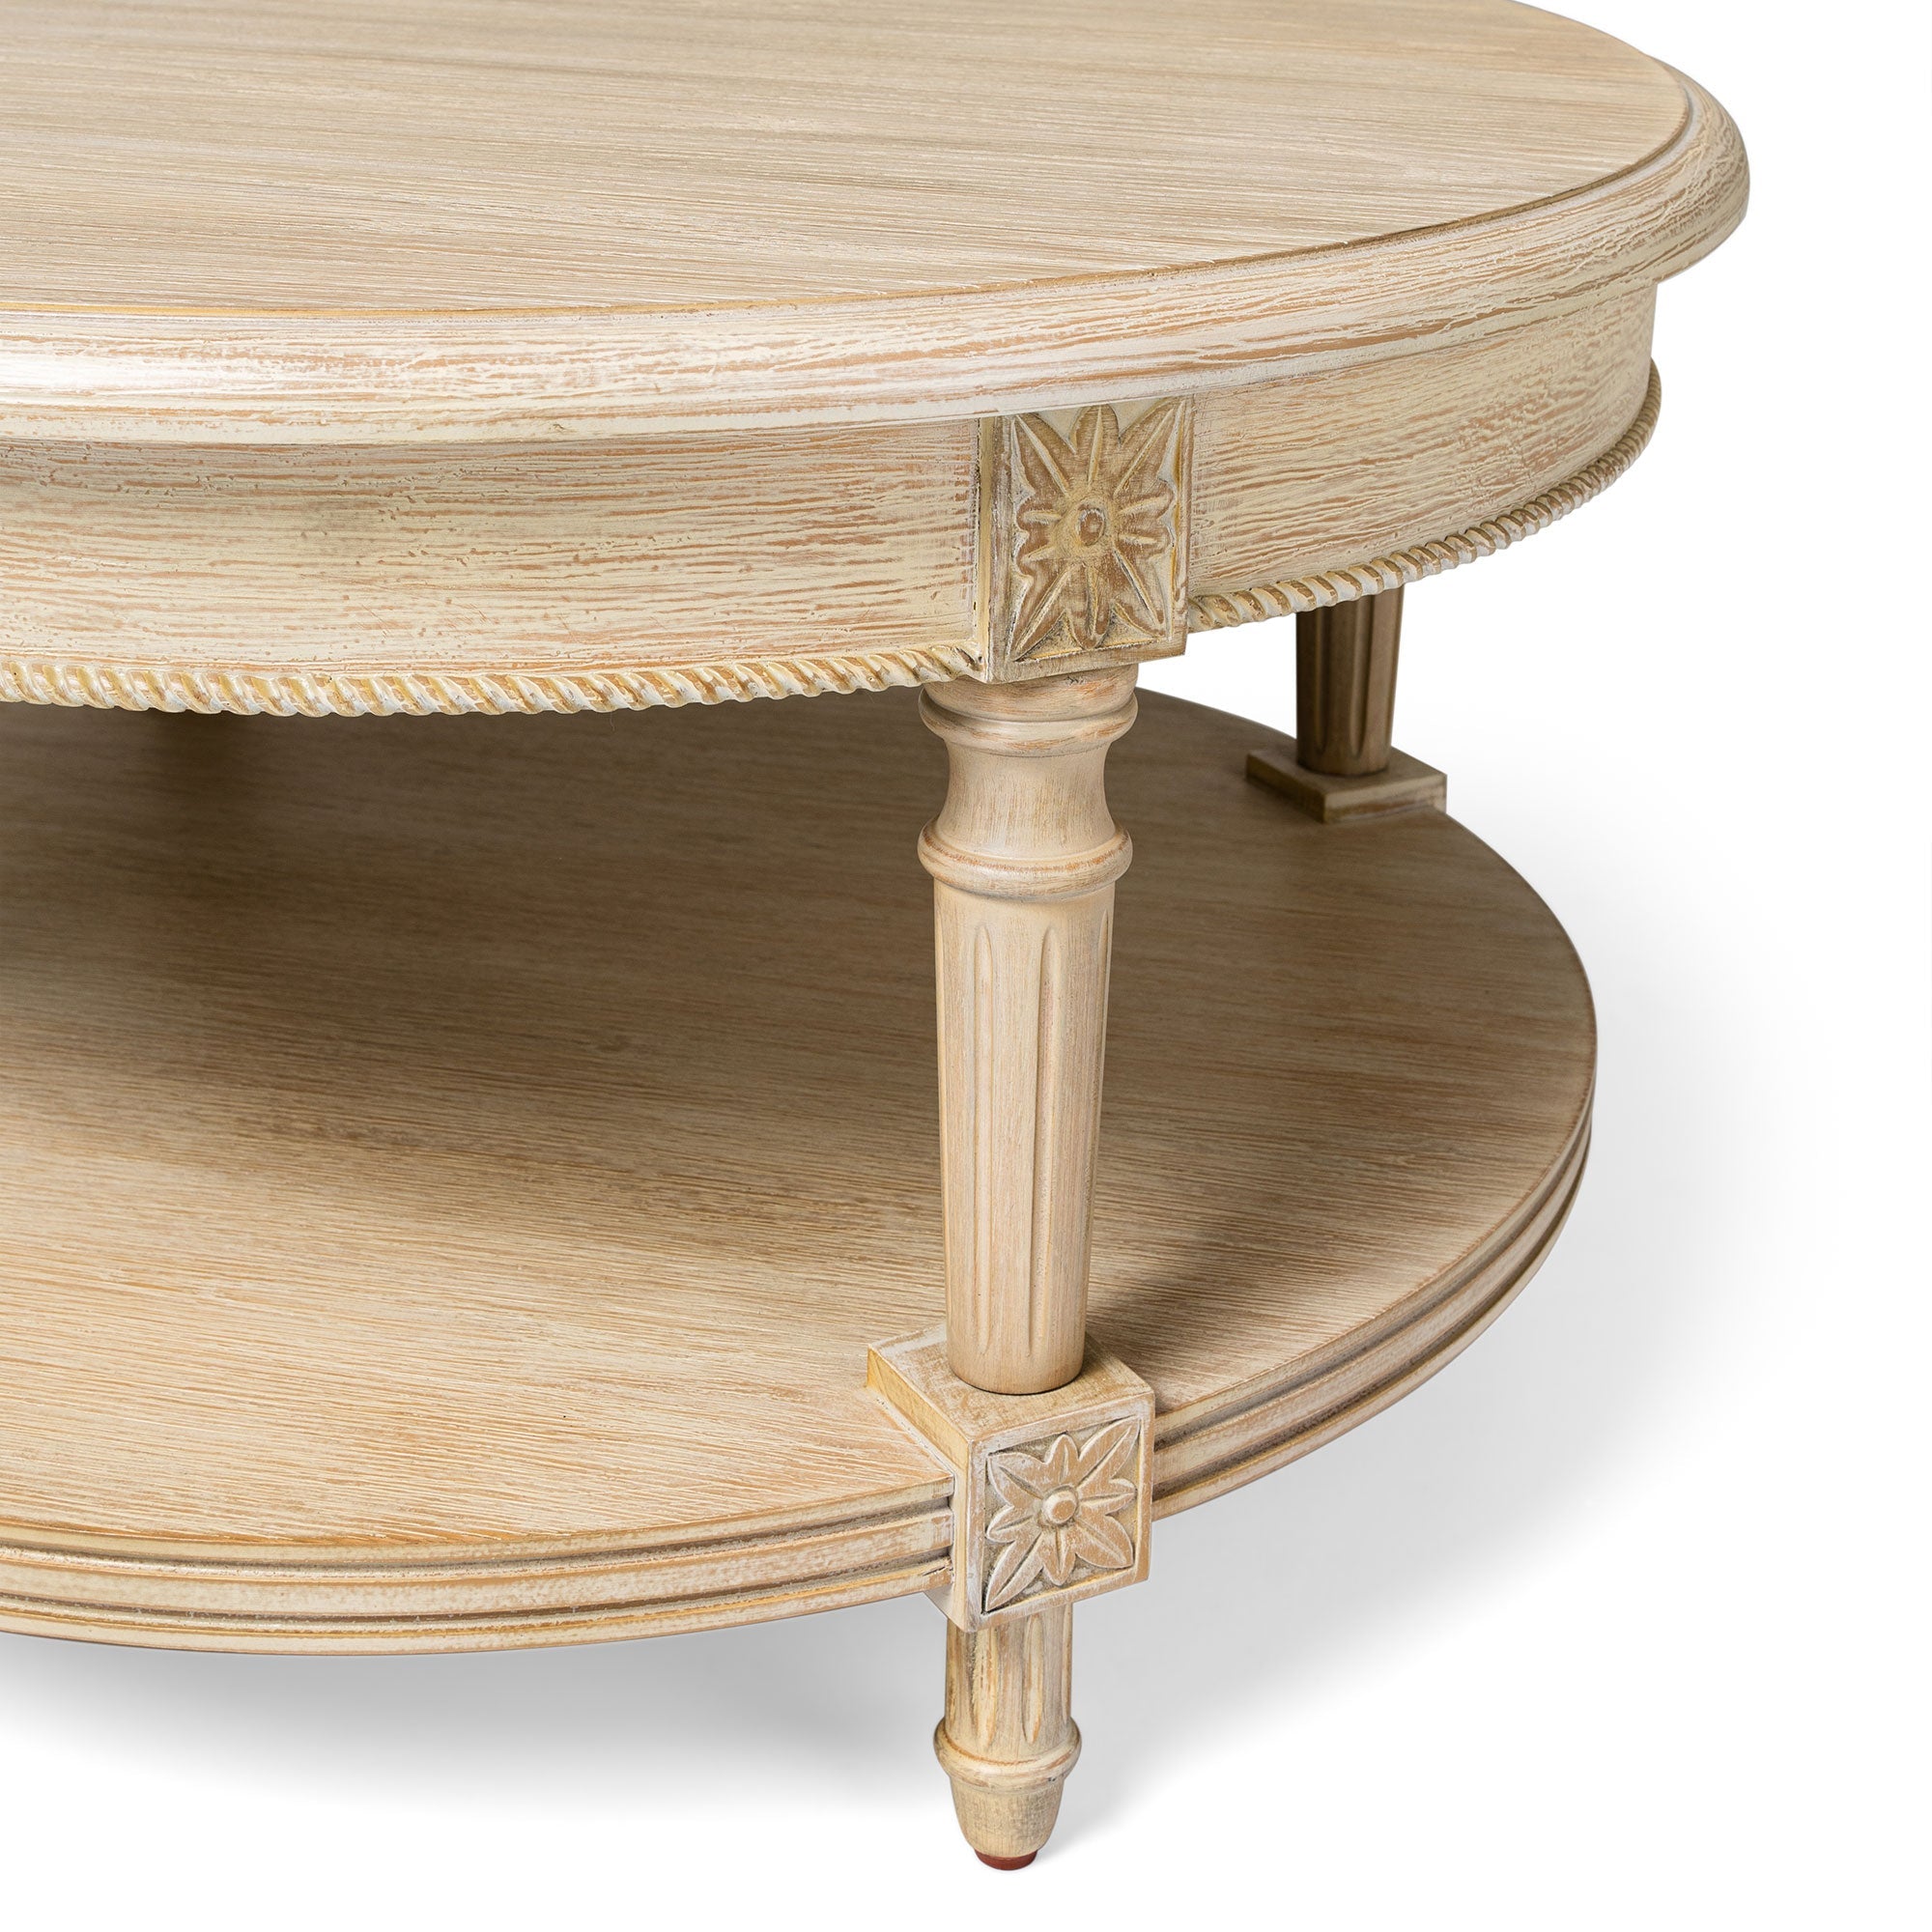 Pullman Traditional Round Wooden Coffee Table in Antiqued White Finish in Accent Tables by Maven Lane